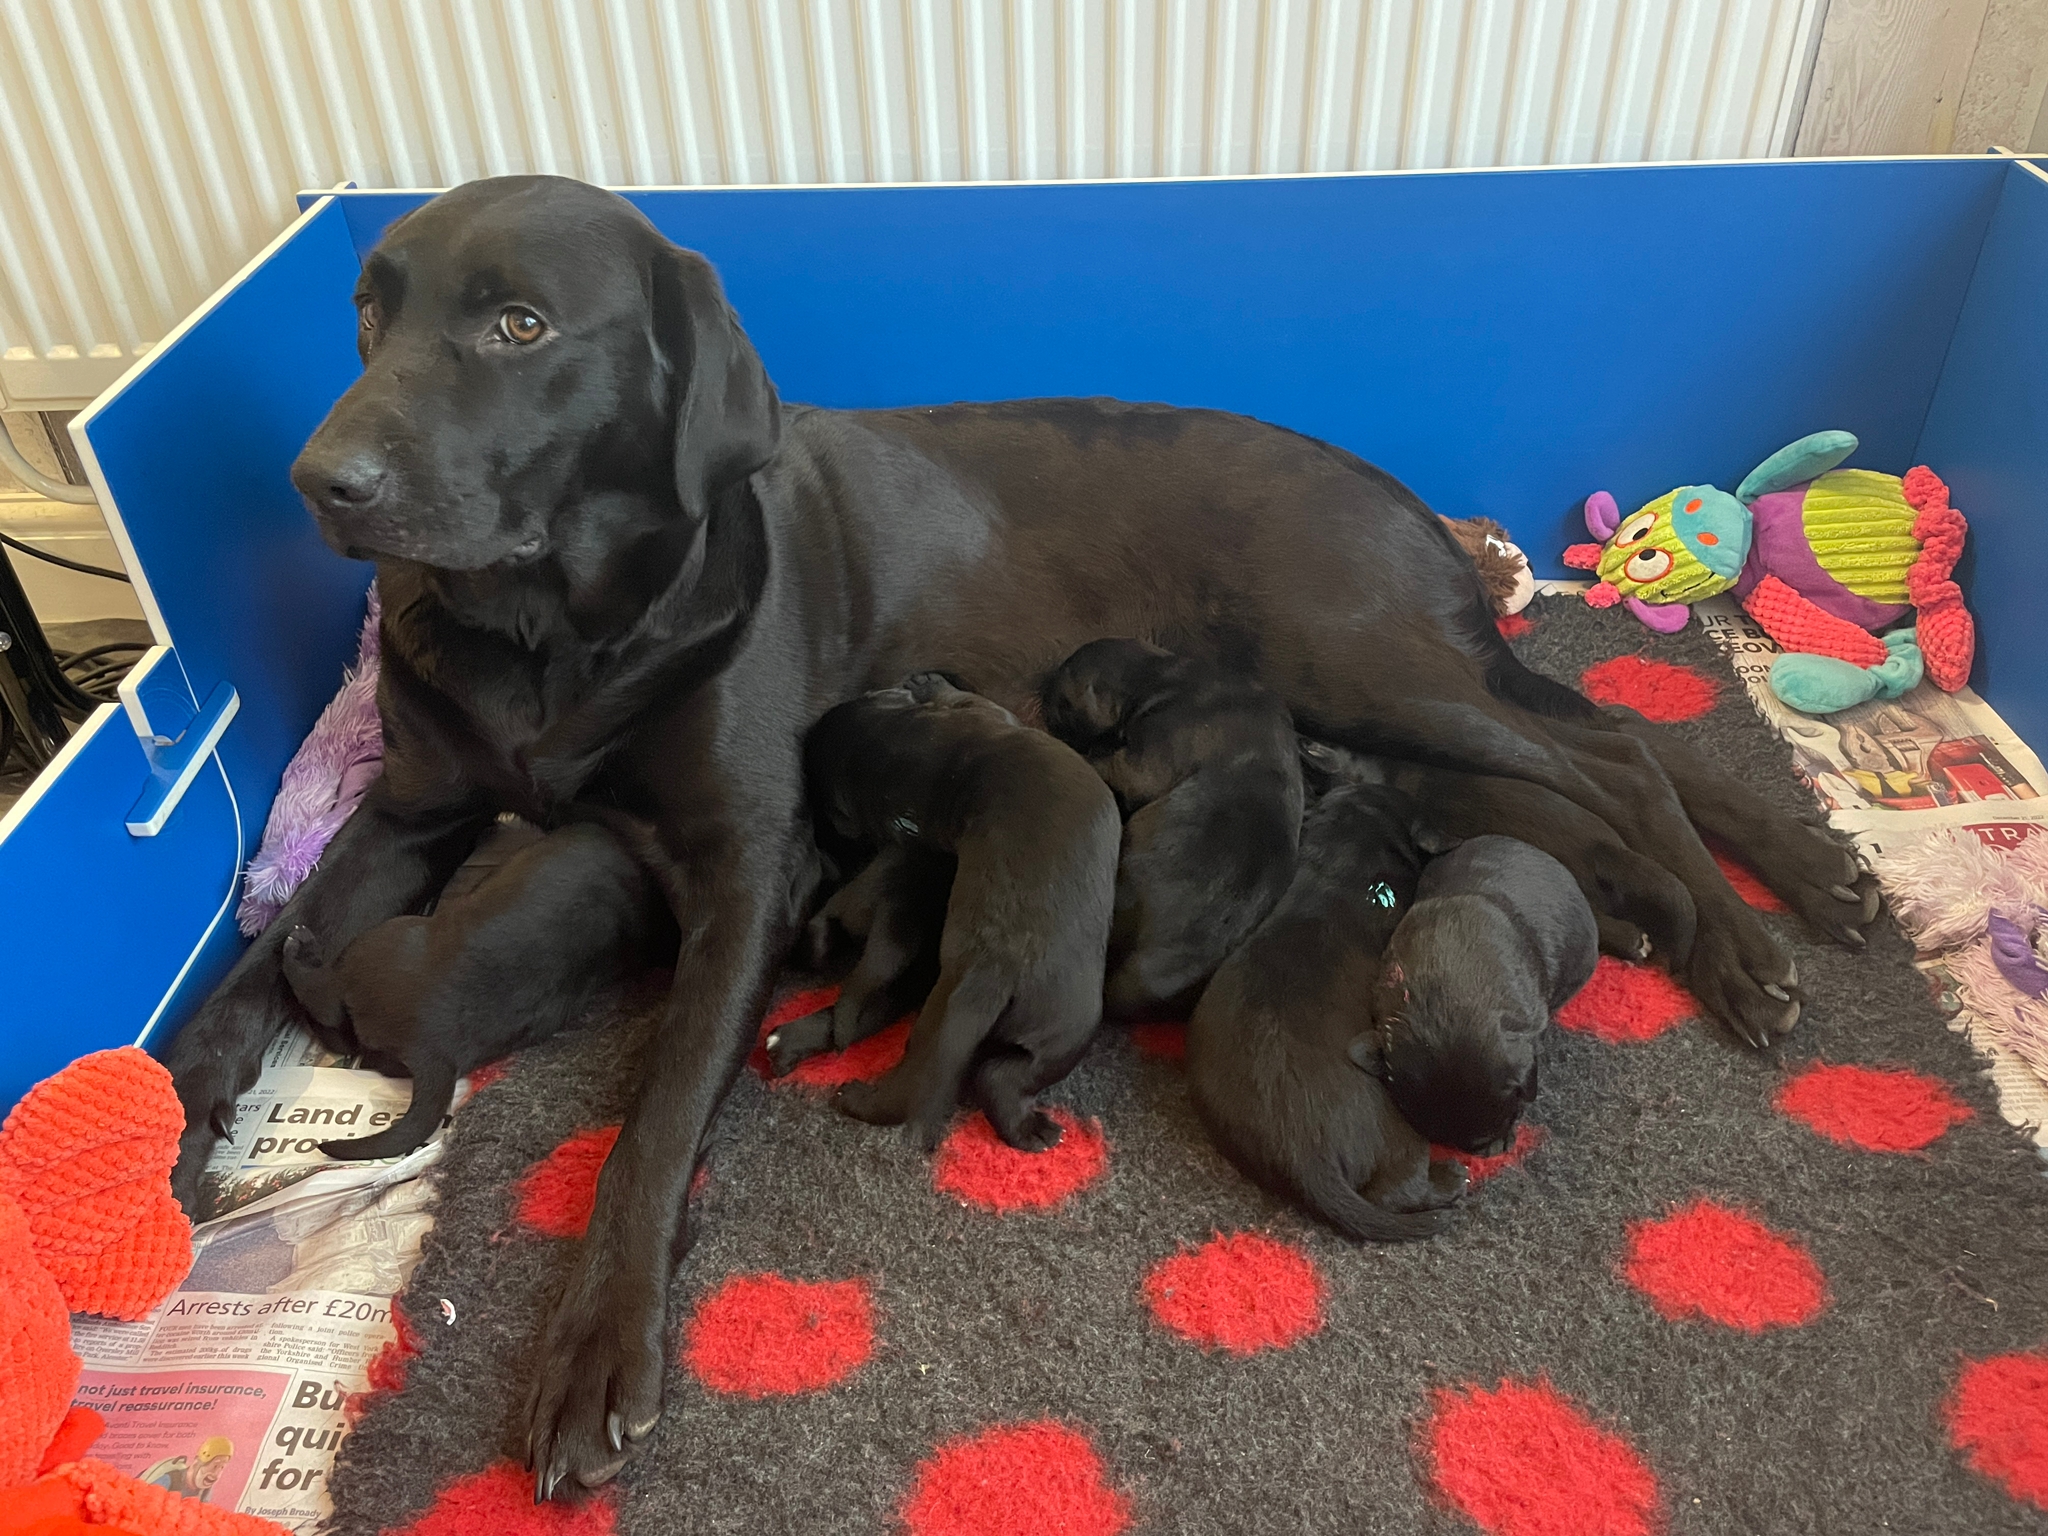 Kim, a black labrador guide dog mum, lays in a blue pen with her litter of newborn puppies.